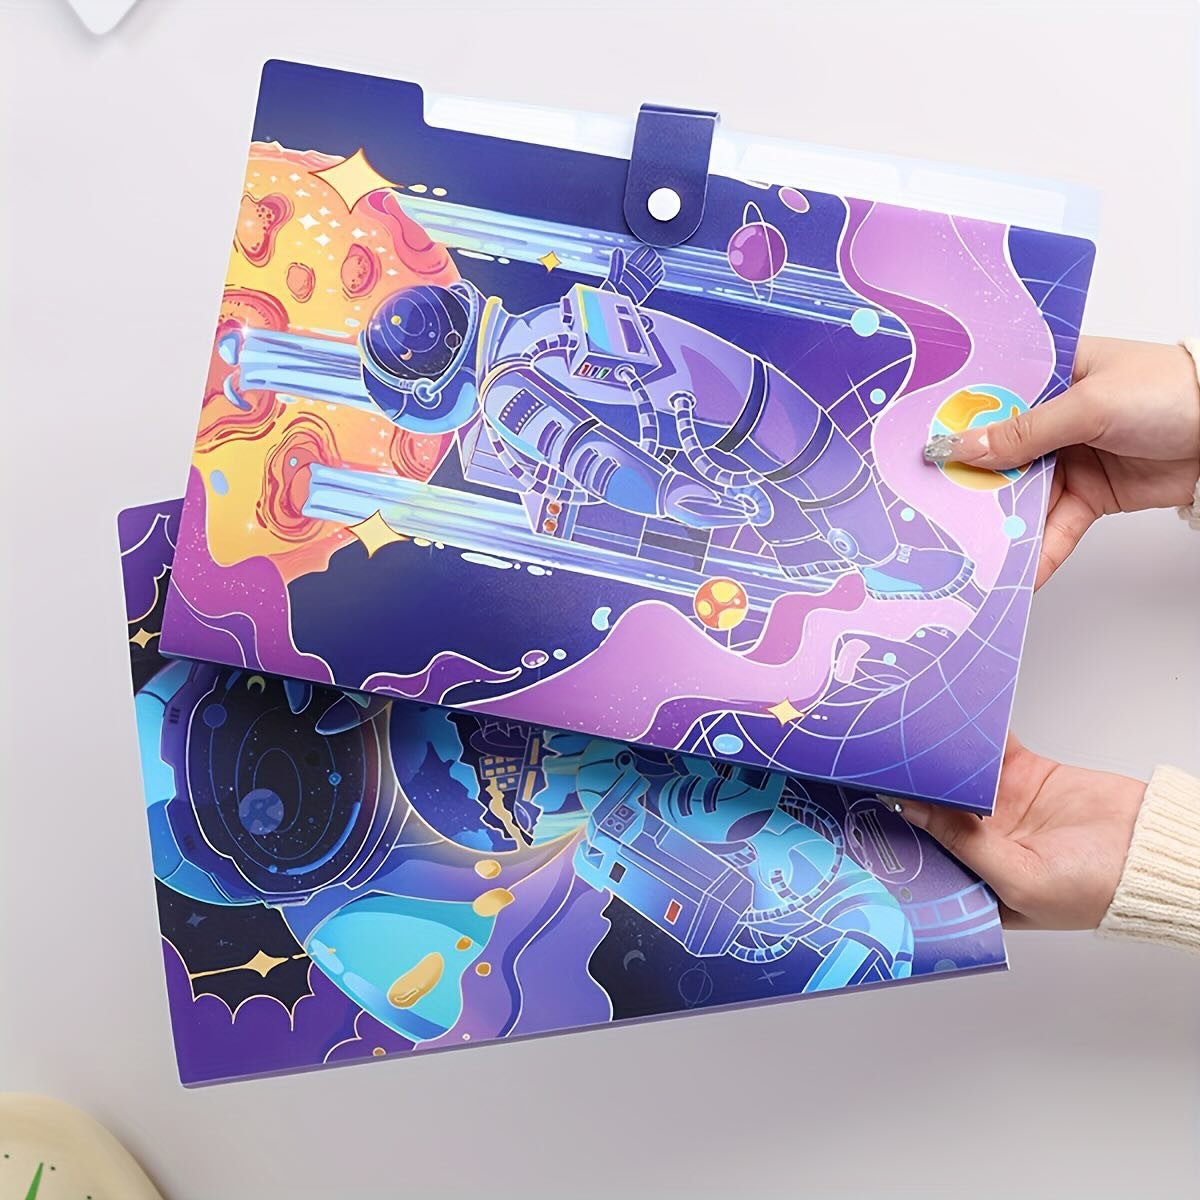 The space man piano folder to save in all your documents 📃

(Folder , stationery , school essentials , kawaii , cute , document holder ) 

#schoolsupplies #kawaii #fyp #smallbusinessindia #folder #bestseller #viralvideos